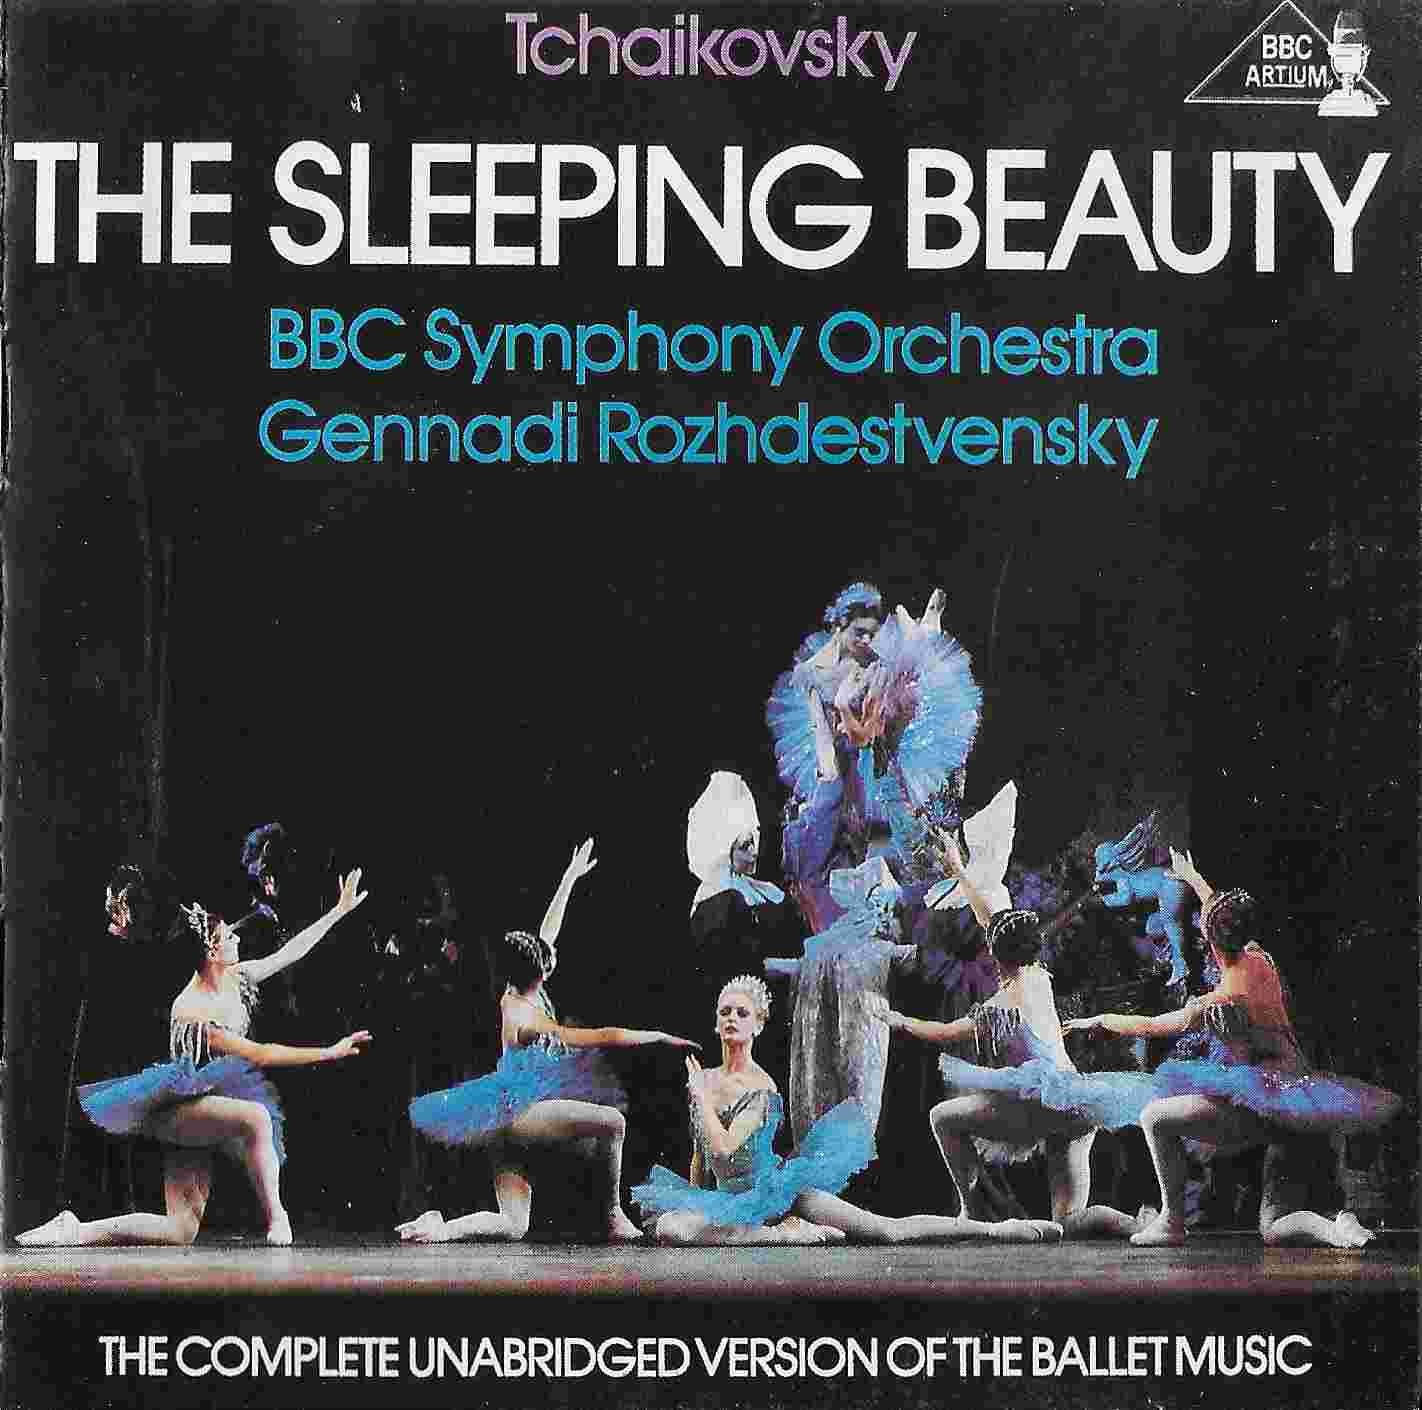 Picture of BBCCD3003X The sleeping beauty by artist Tchaikovsky from the BBC cds - Records and Tapes library